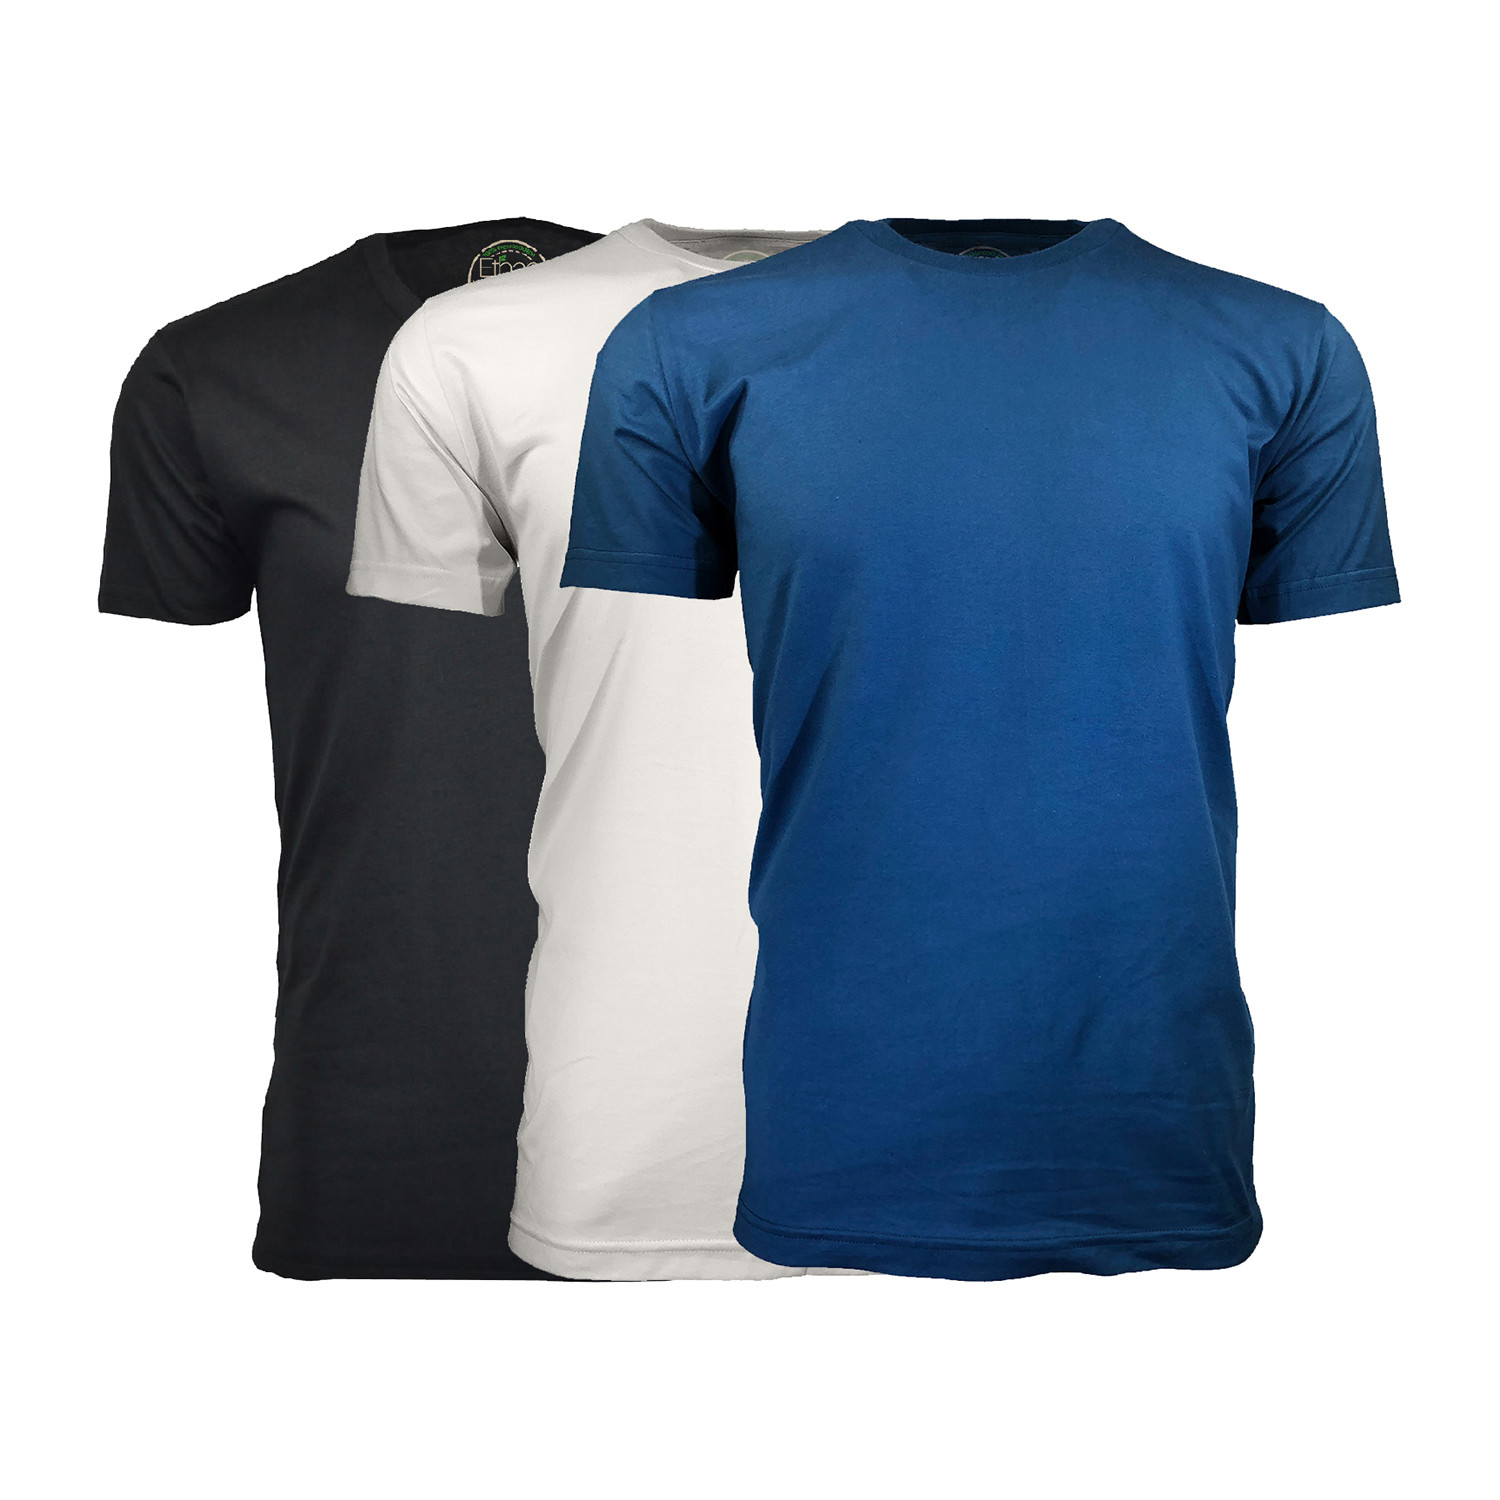 Organic Cotton Semi-Fitted Crew Neck T-Shirt // Black + Teal + White ...